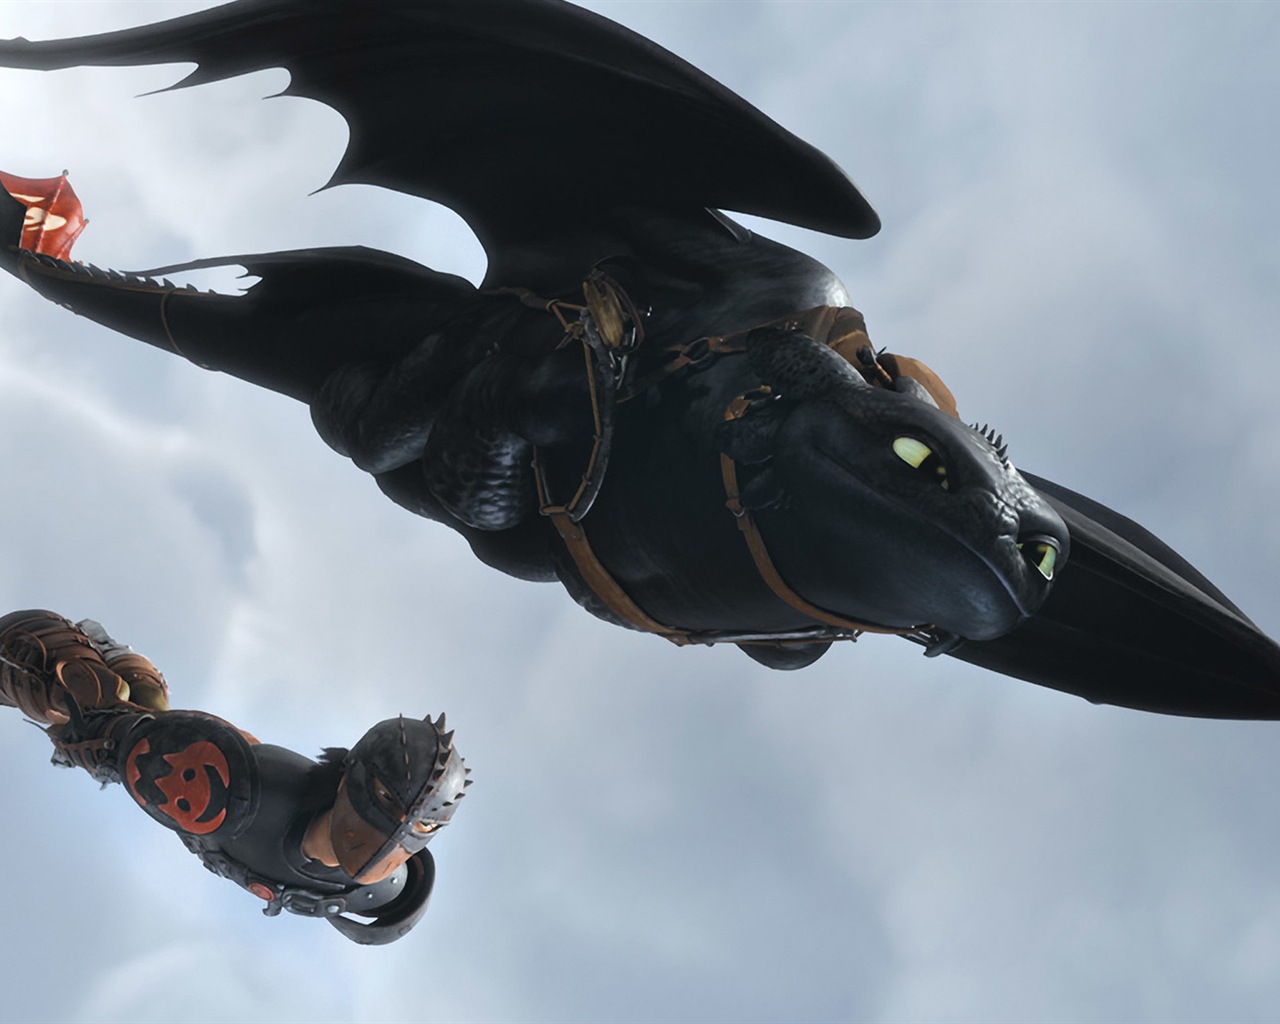 How to Train Your Dragon 2 驯龙高手2 高清壁纸6 - 1280x1024